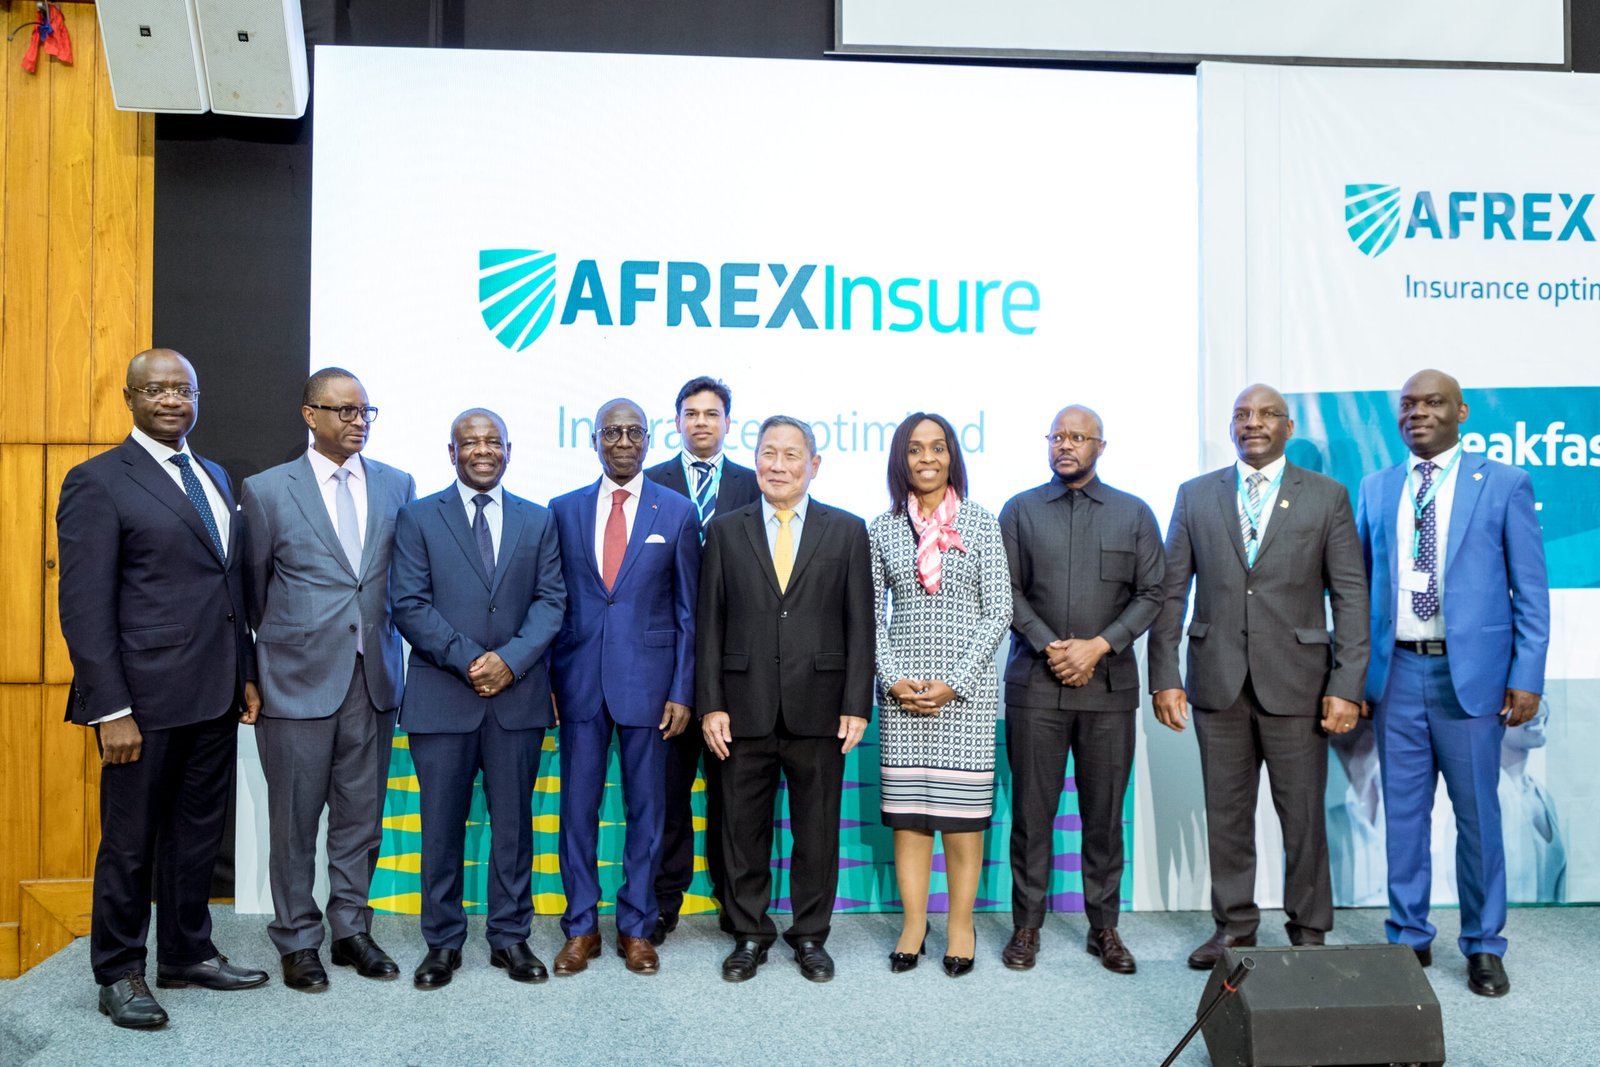 Ghana: Afreximbank launches Insurance subsidiary to support intra-African trade